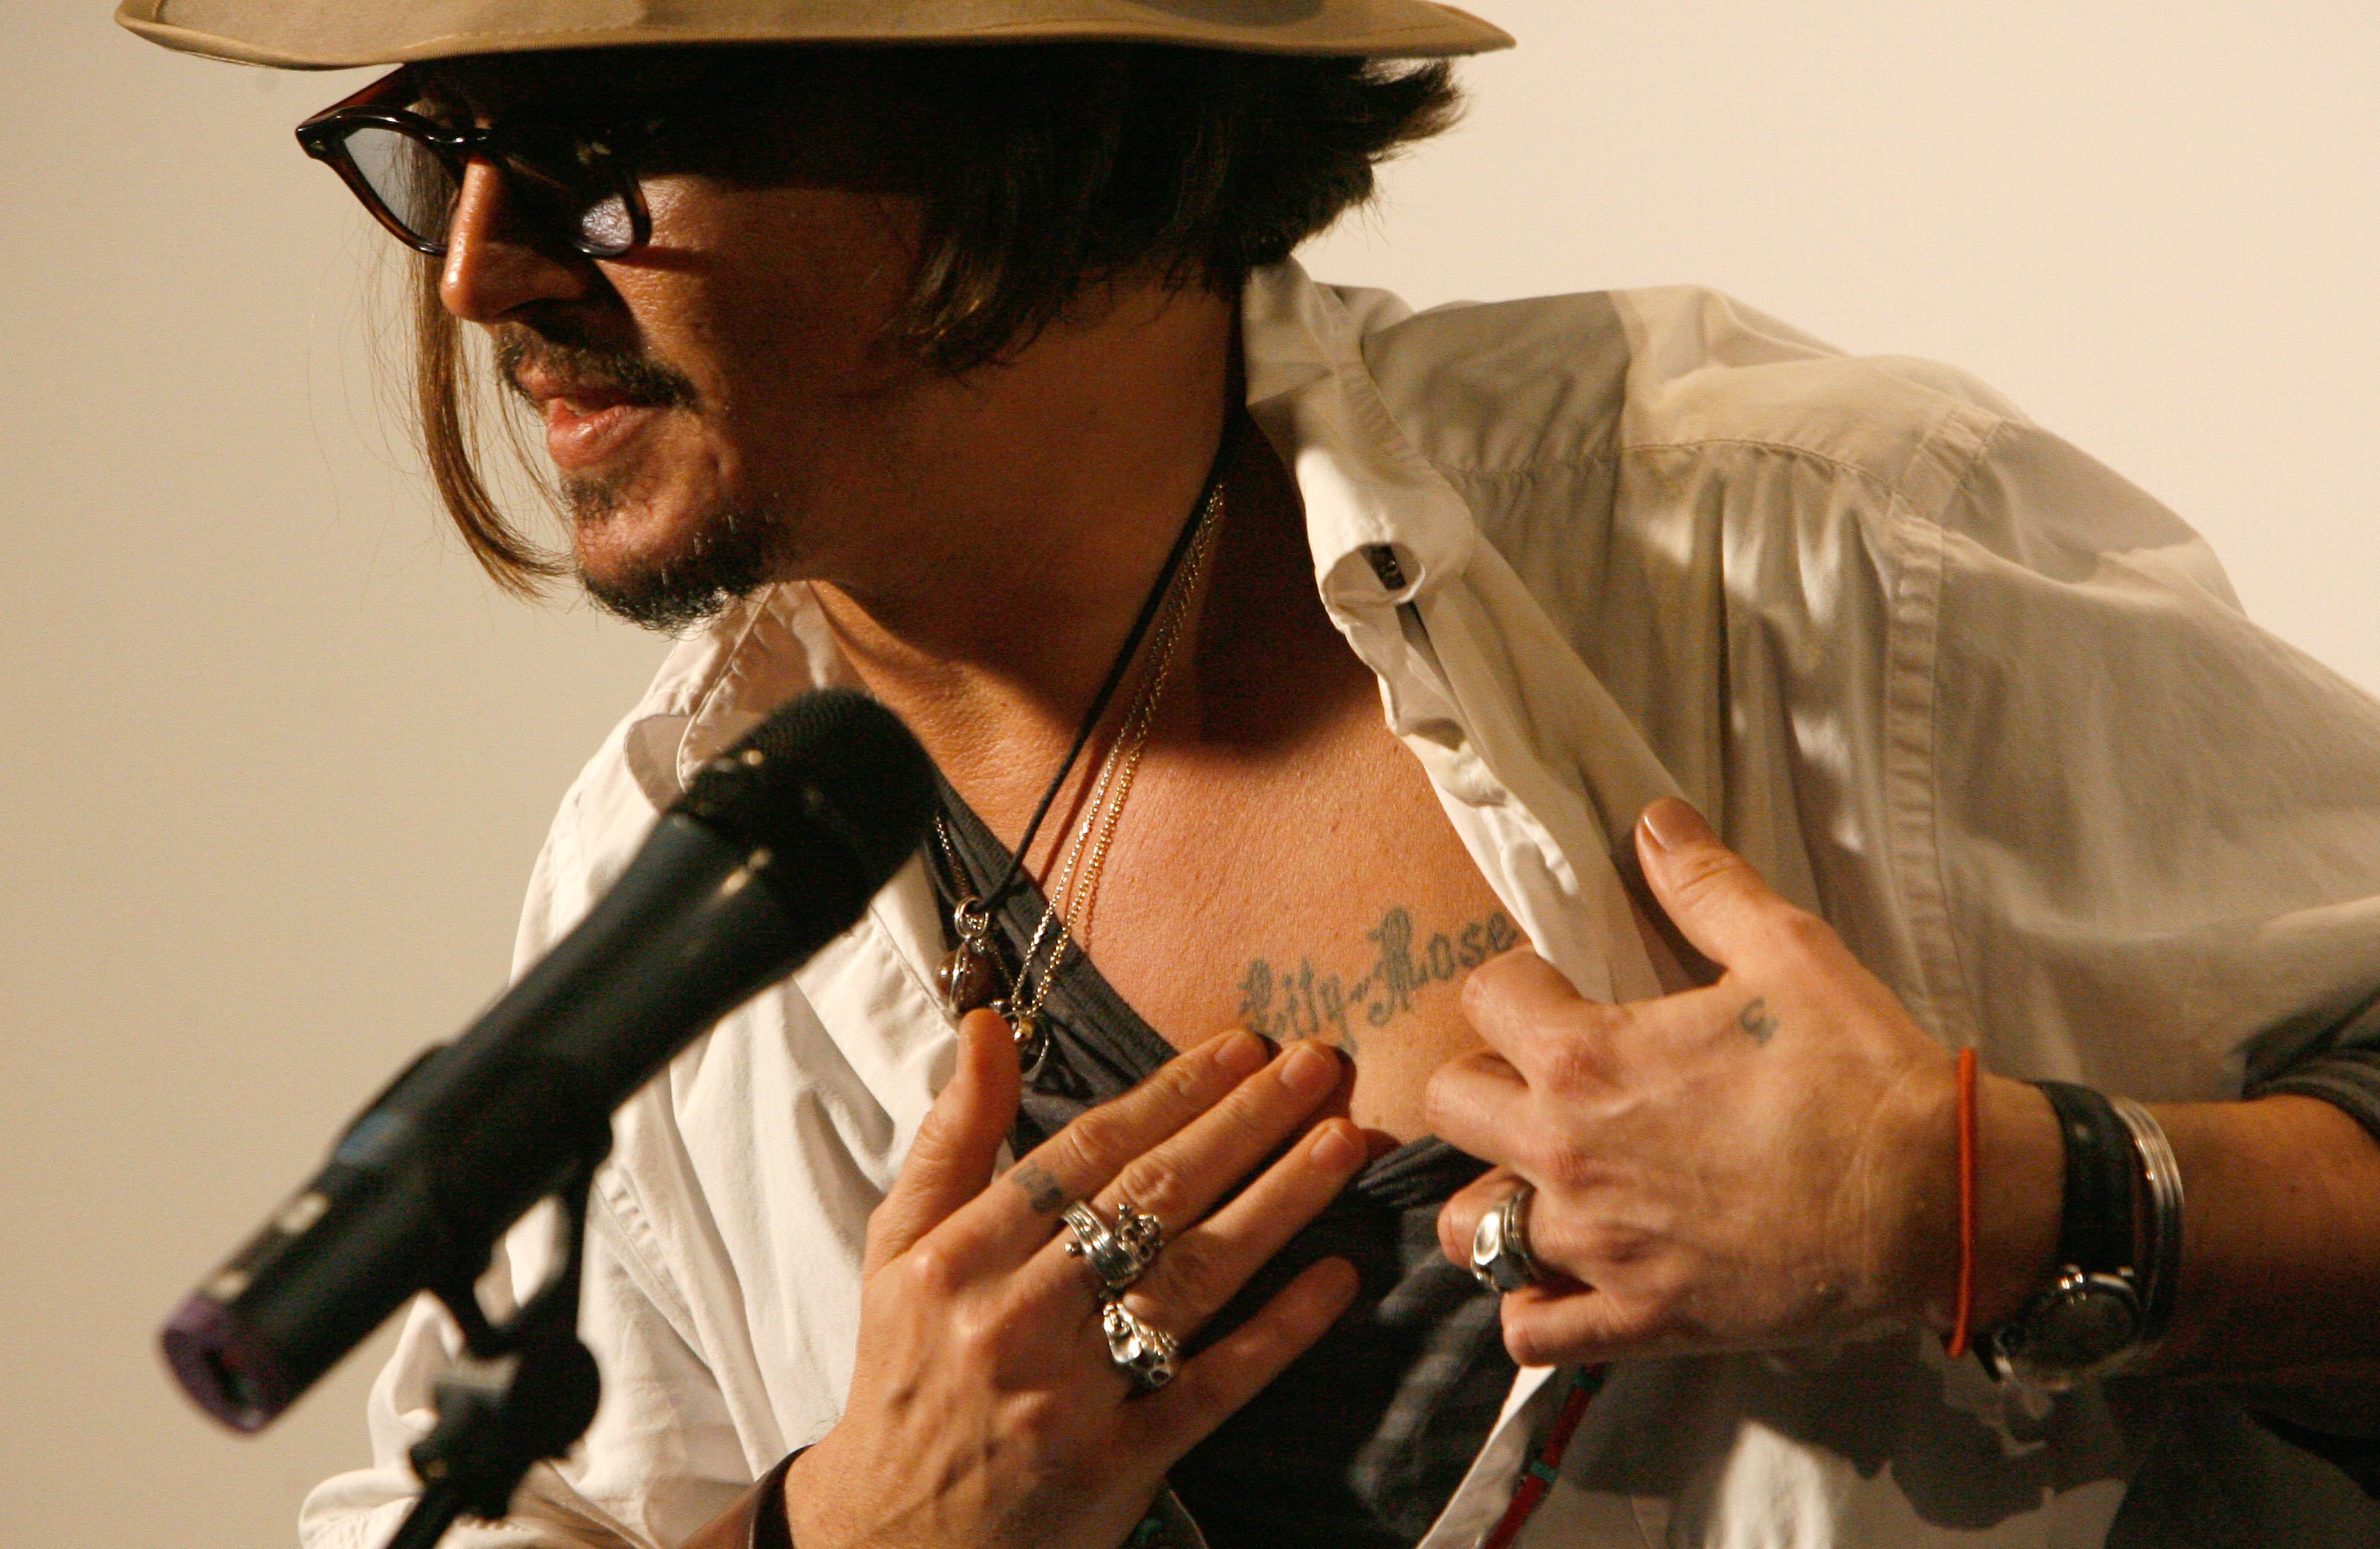 Johnny Depp at a press conference during the Kustendorf music & film festival, day 2 on January 14, 2010 in Belgrade, Serbia. / Source: Getty Images